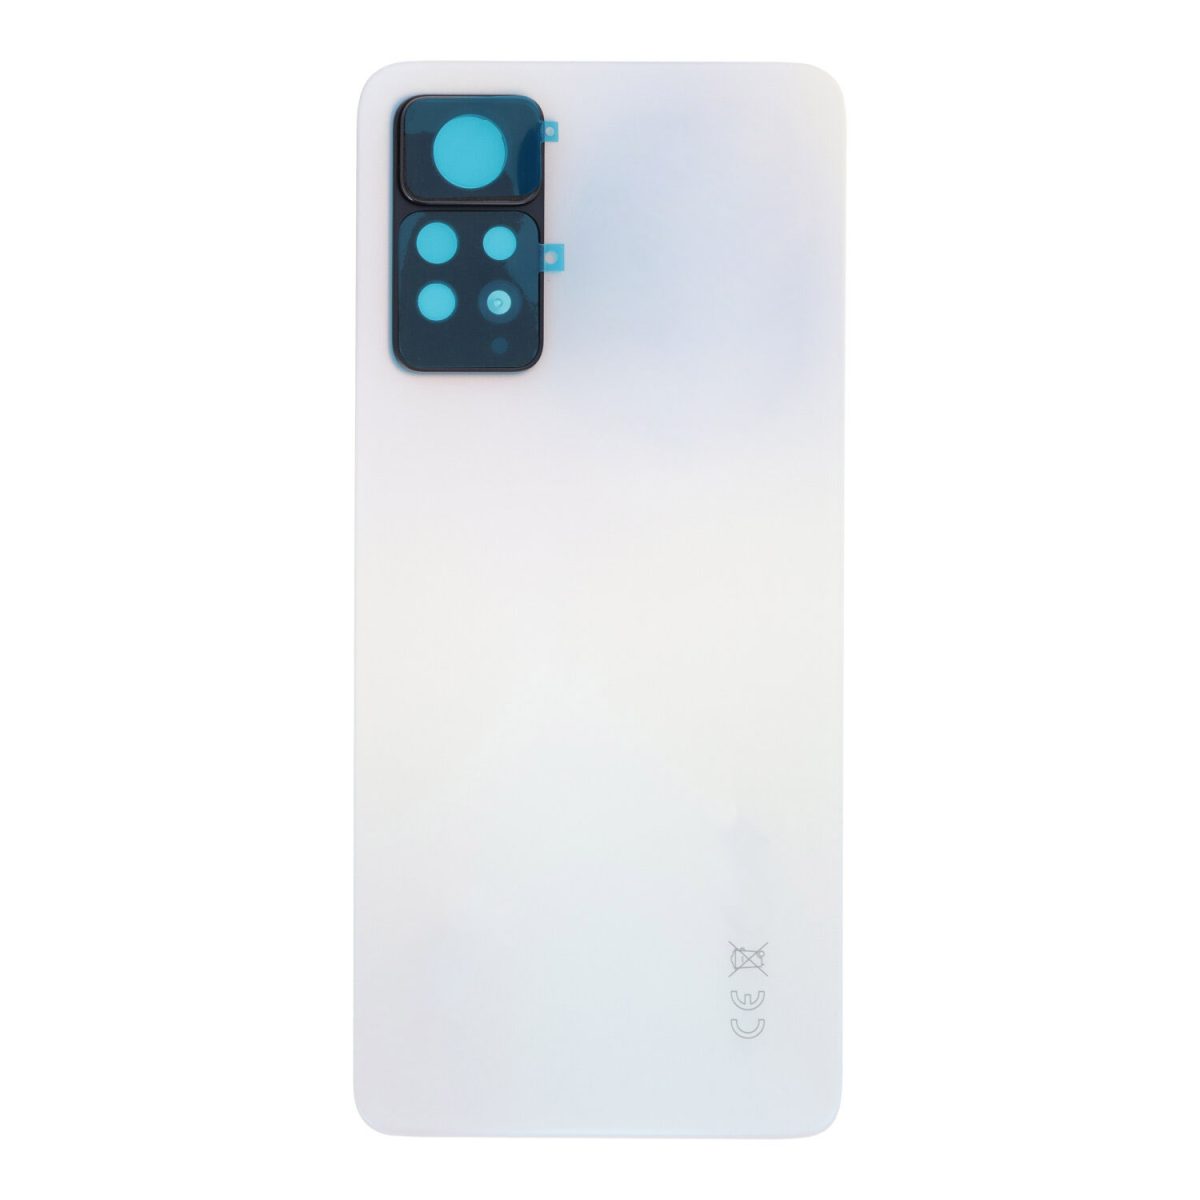 Backcover for Xiaomi Redmi Note 11 Pro - White - OEM